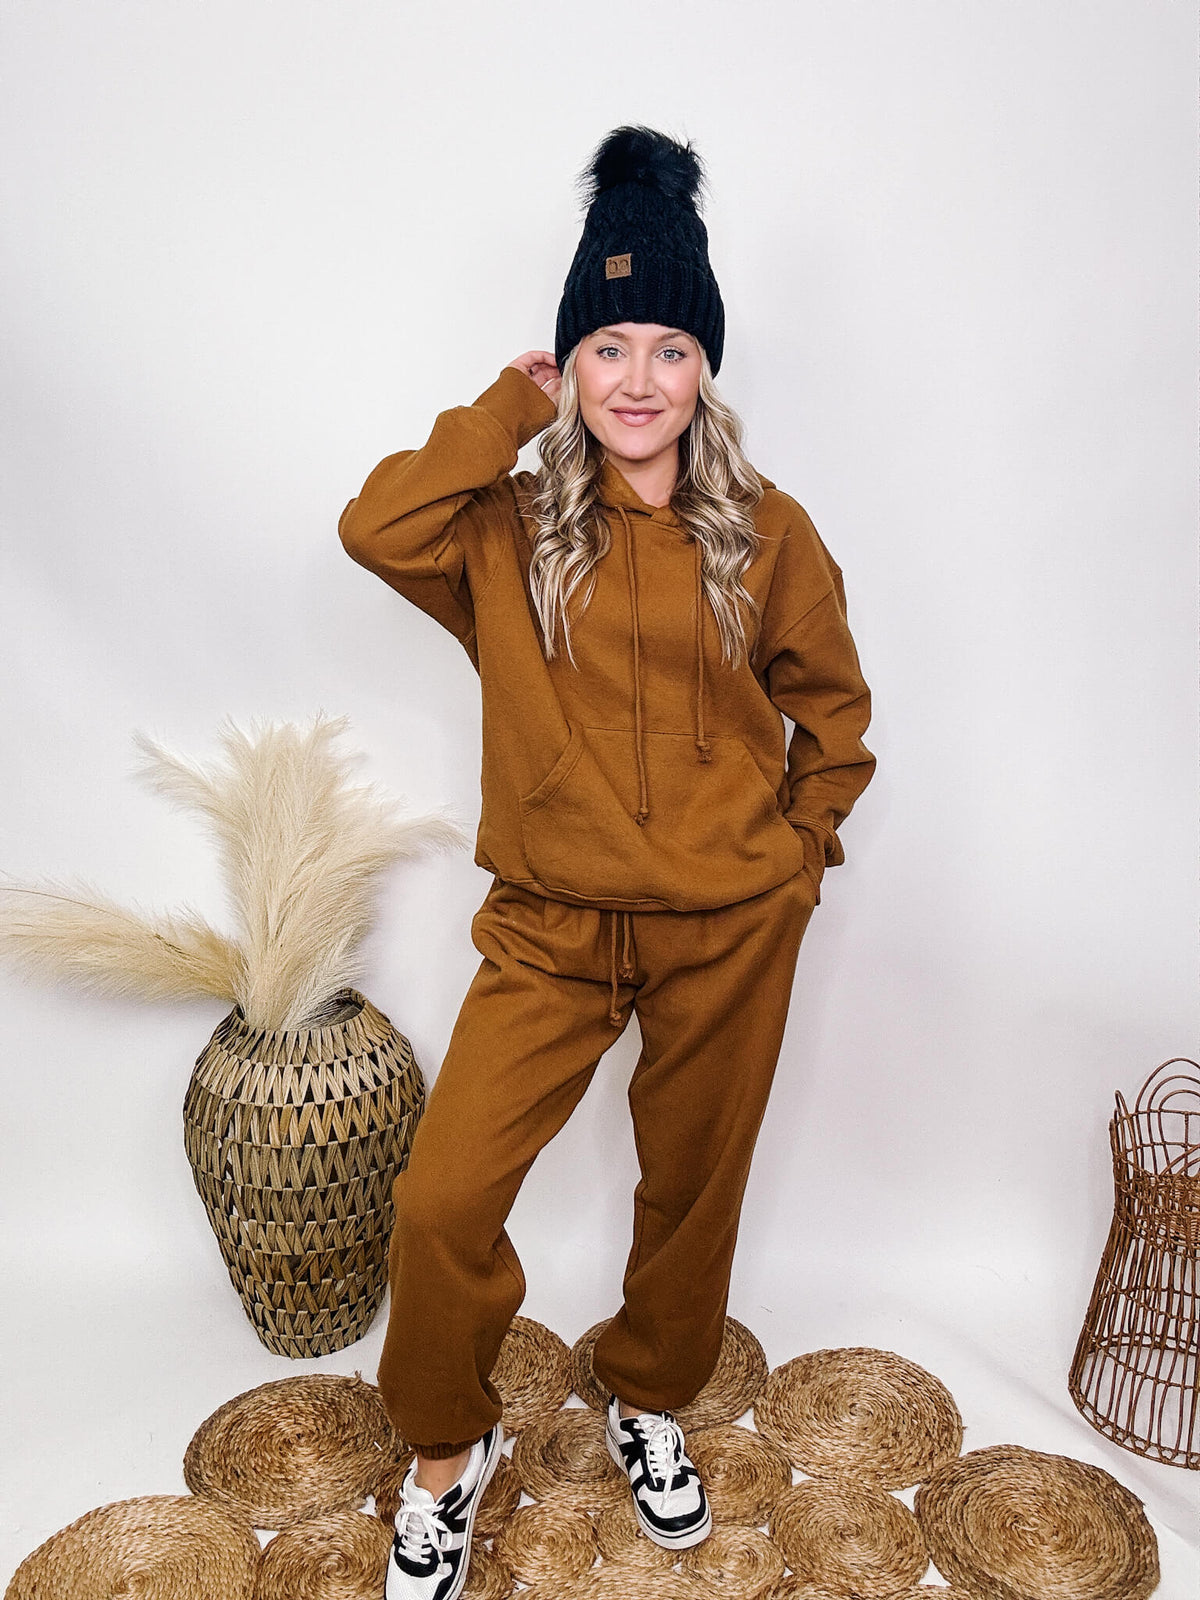 Hyfve Brown Fleece Lined Long Sleeve Hoodie Kangaroo Pocket Oversized Fit Self: 80% Cotton, 20% Polyester | Contrast: 58% Cotton, 39% Polyester, 3% Spandex